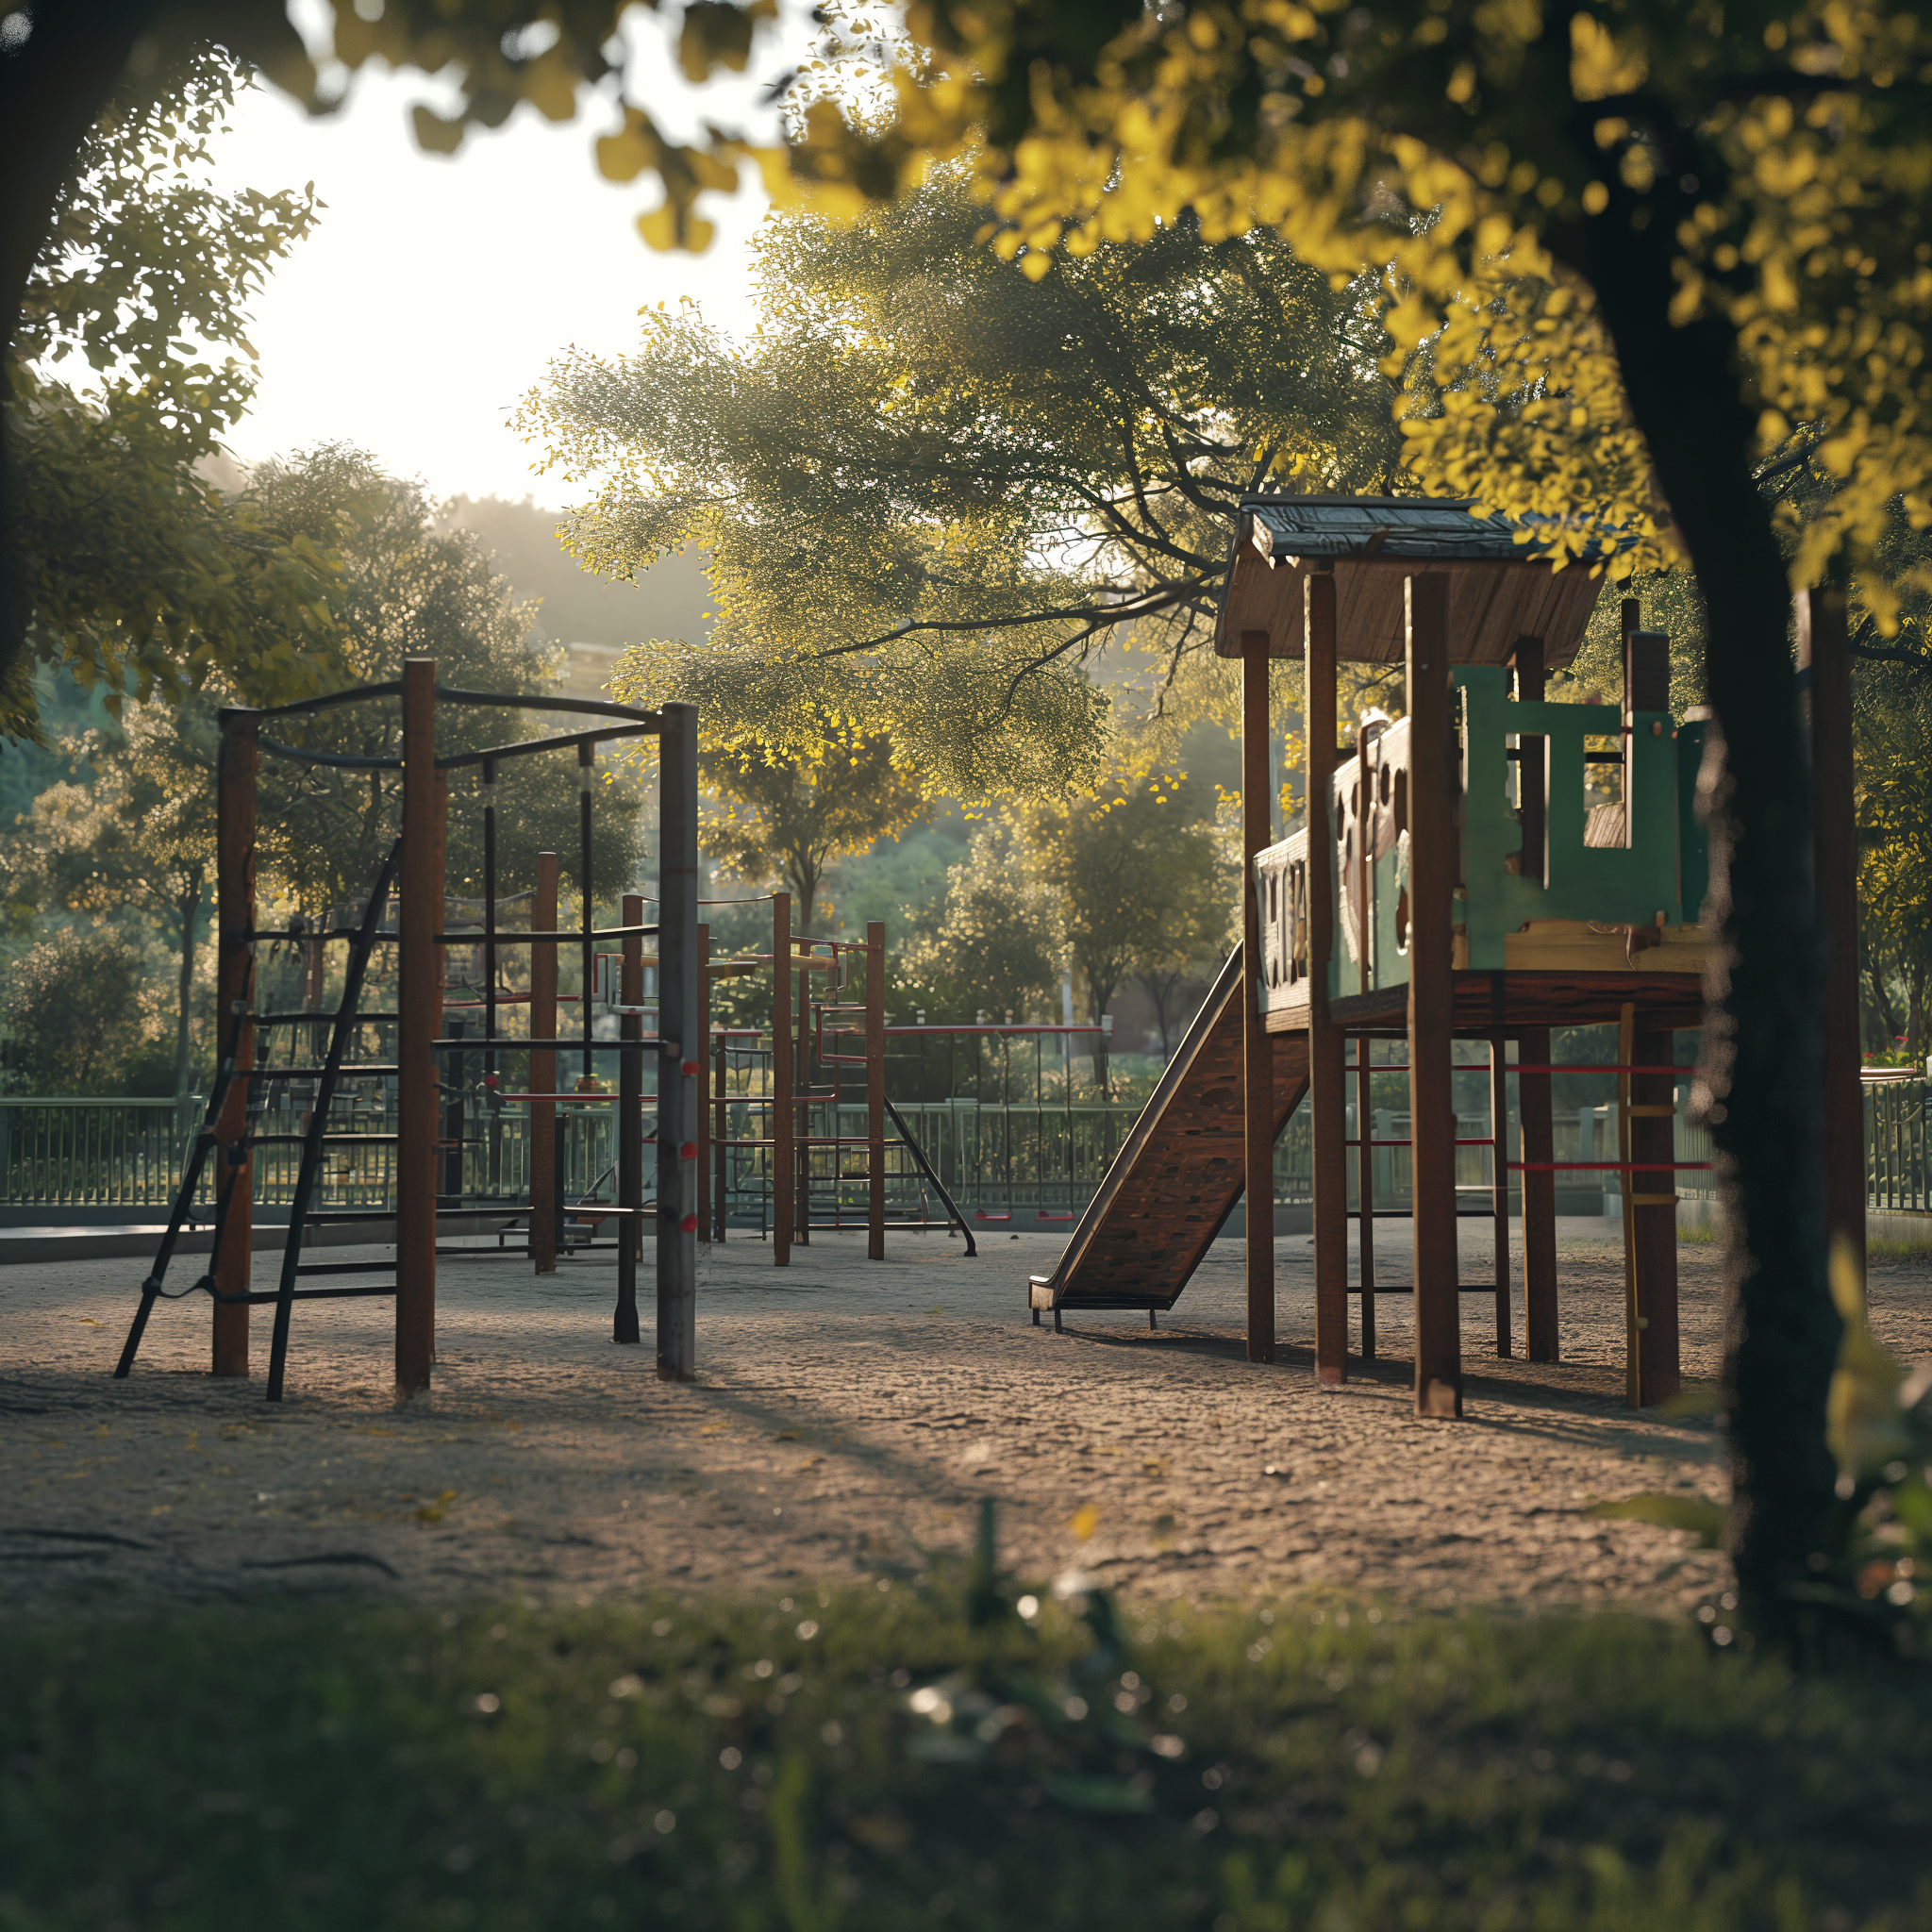 A playground at a park | Source: Midjourney